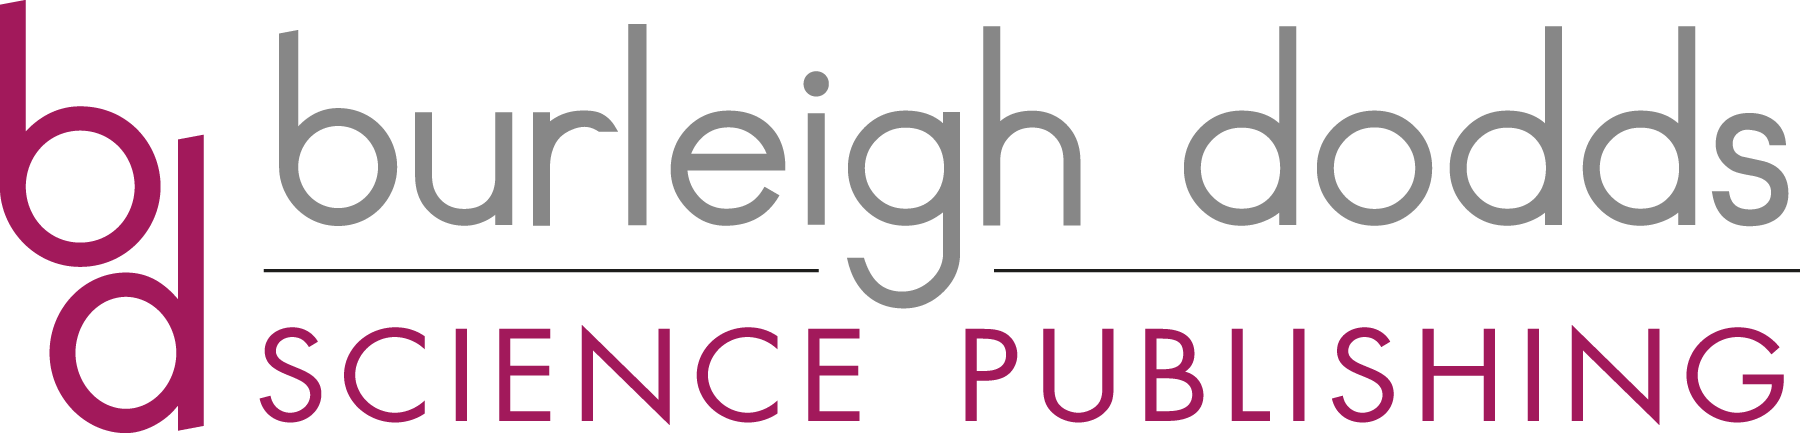 BURLEIGH DODDS SCIENCE PUBLISHING